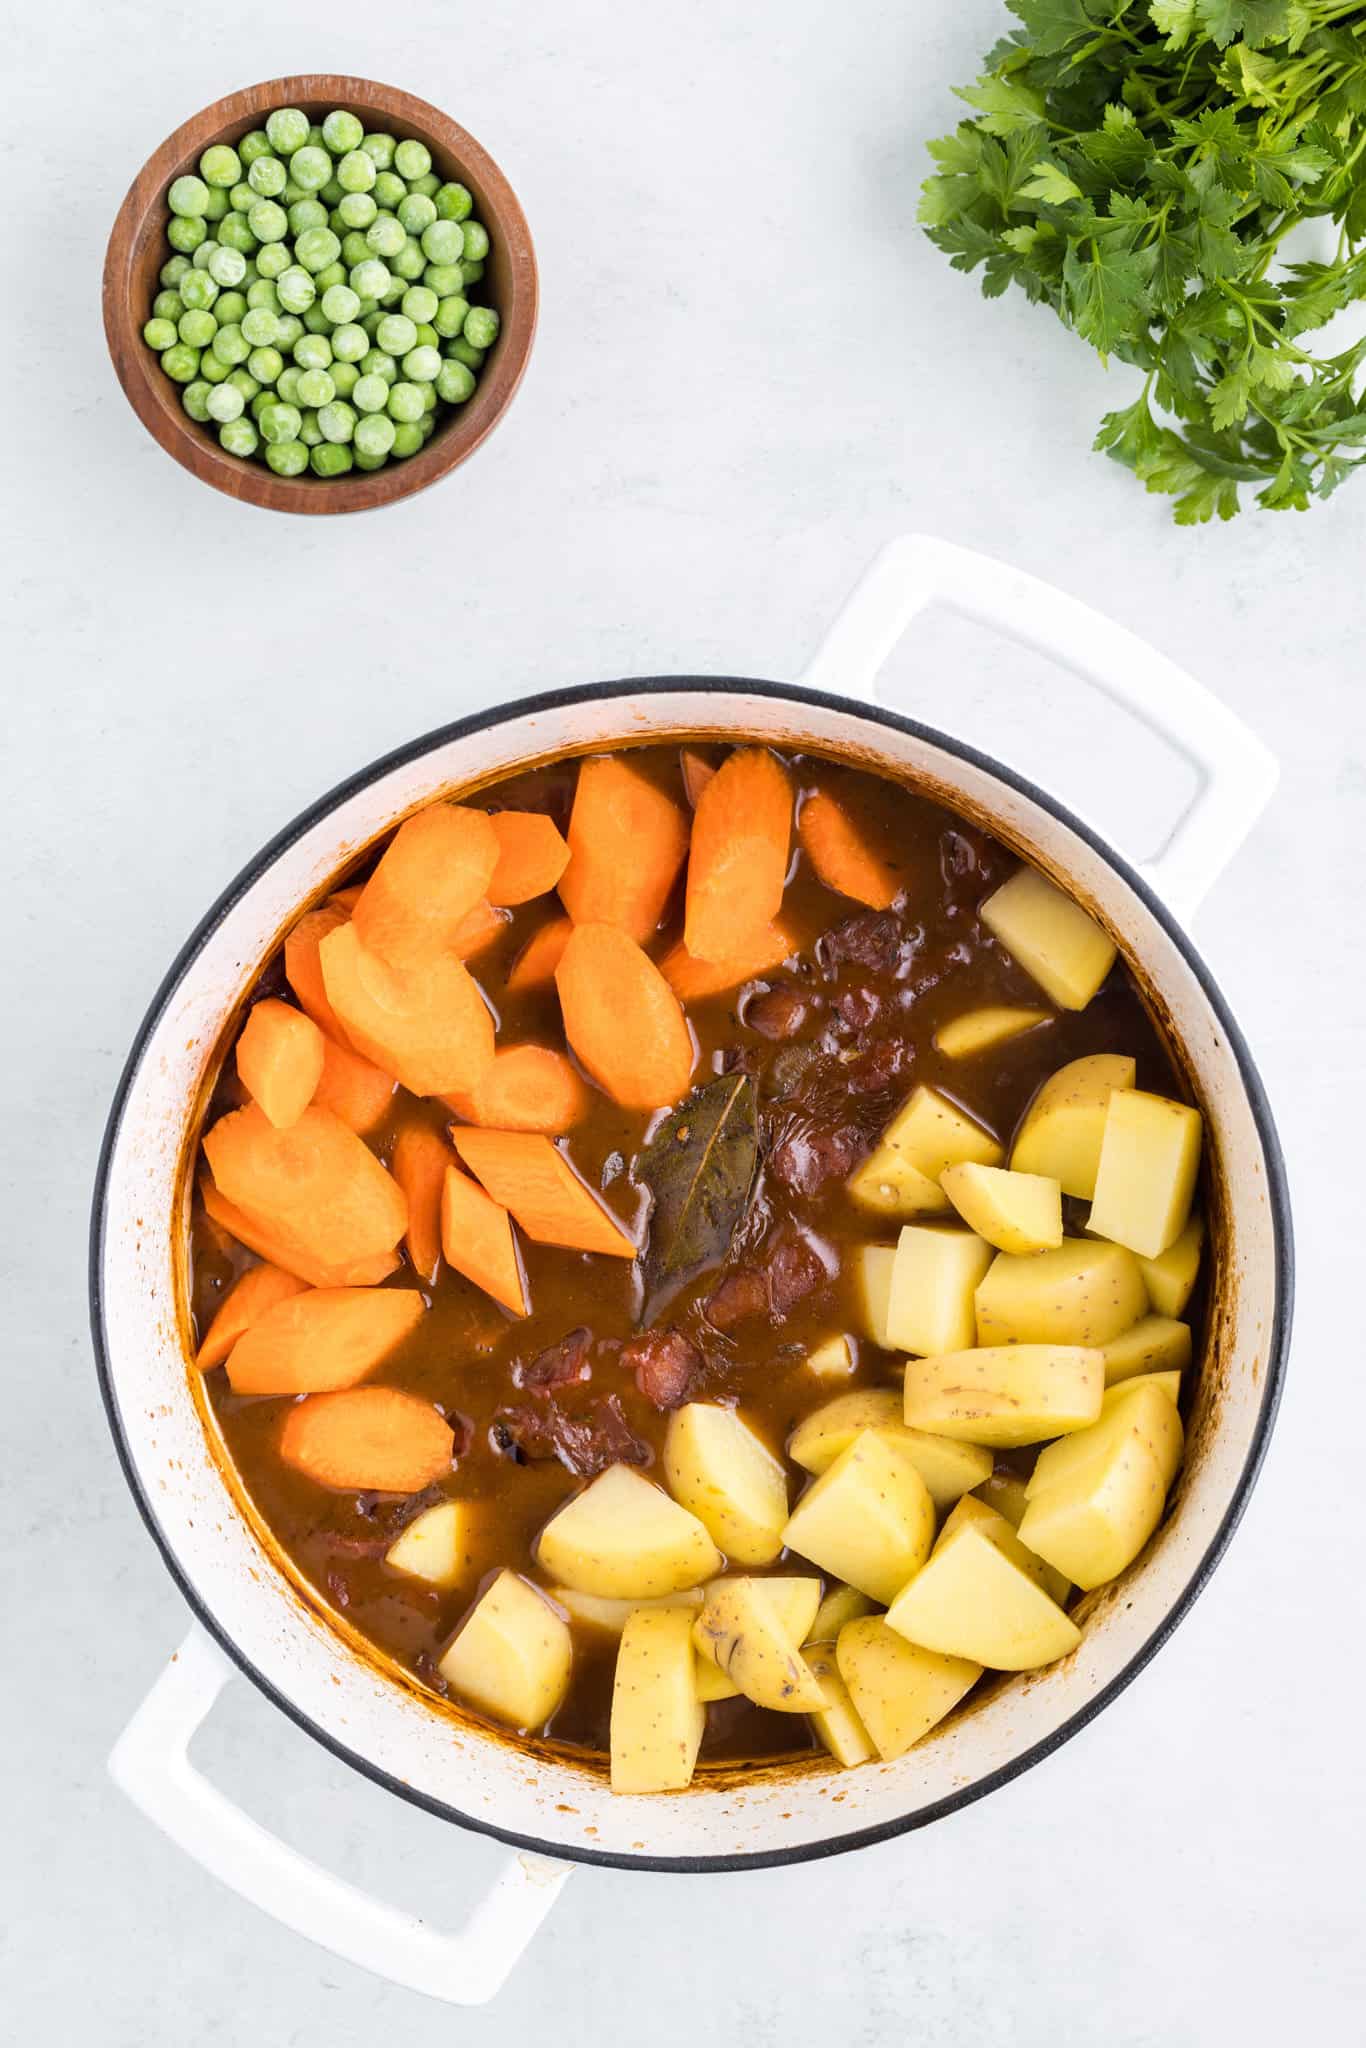 chopped carrots and potatoes added to beef stew pot